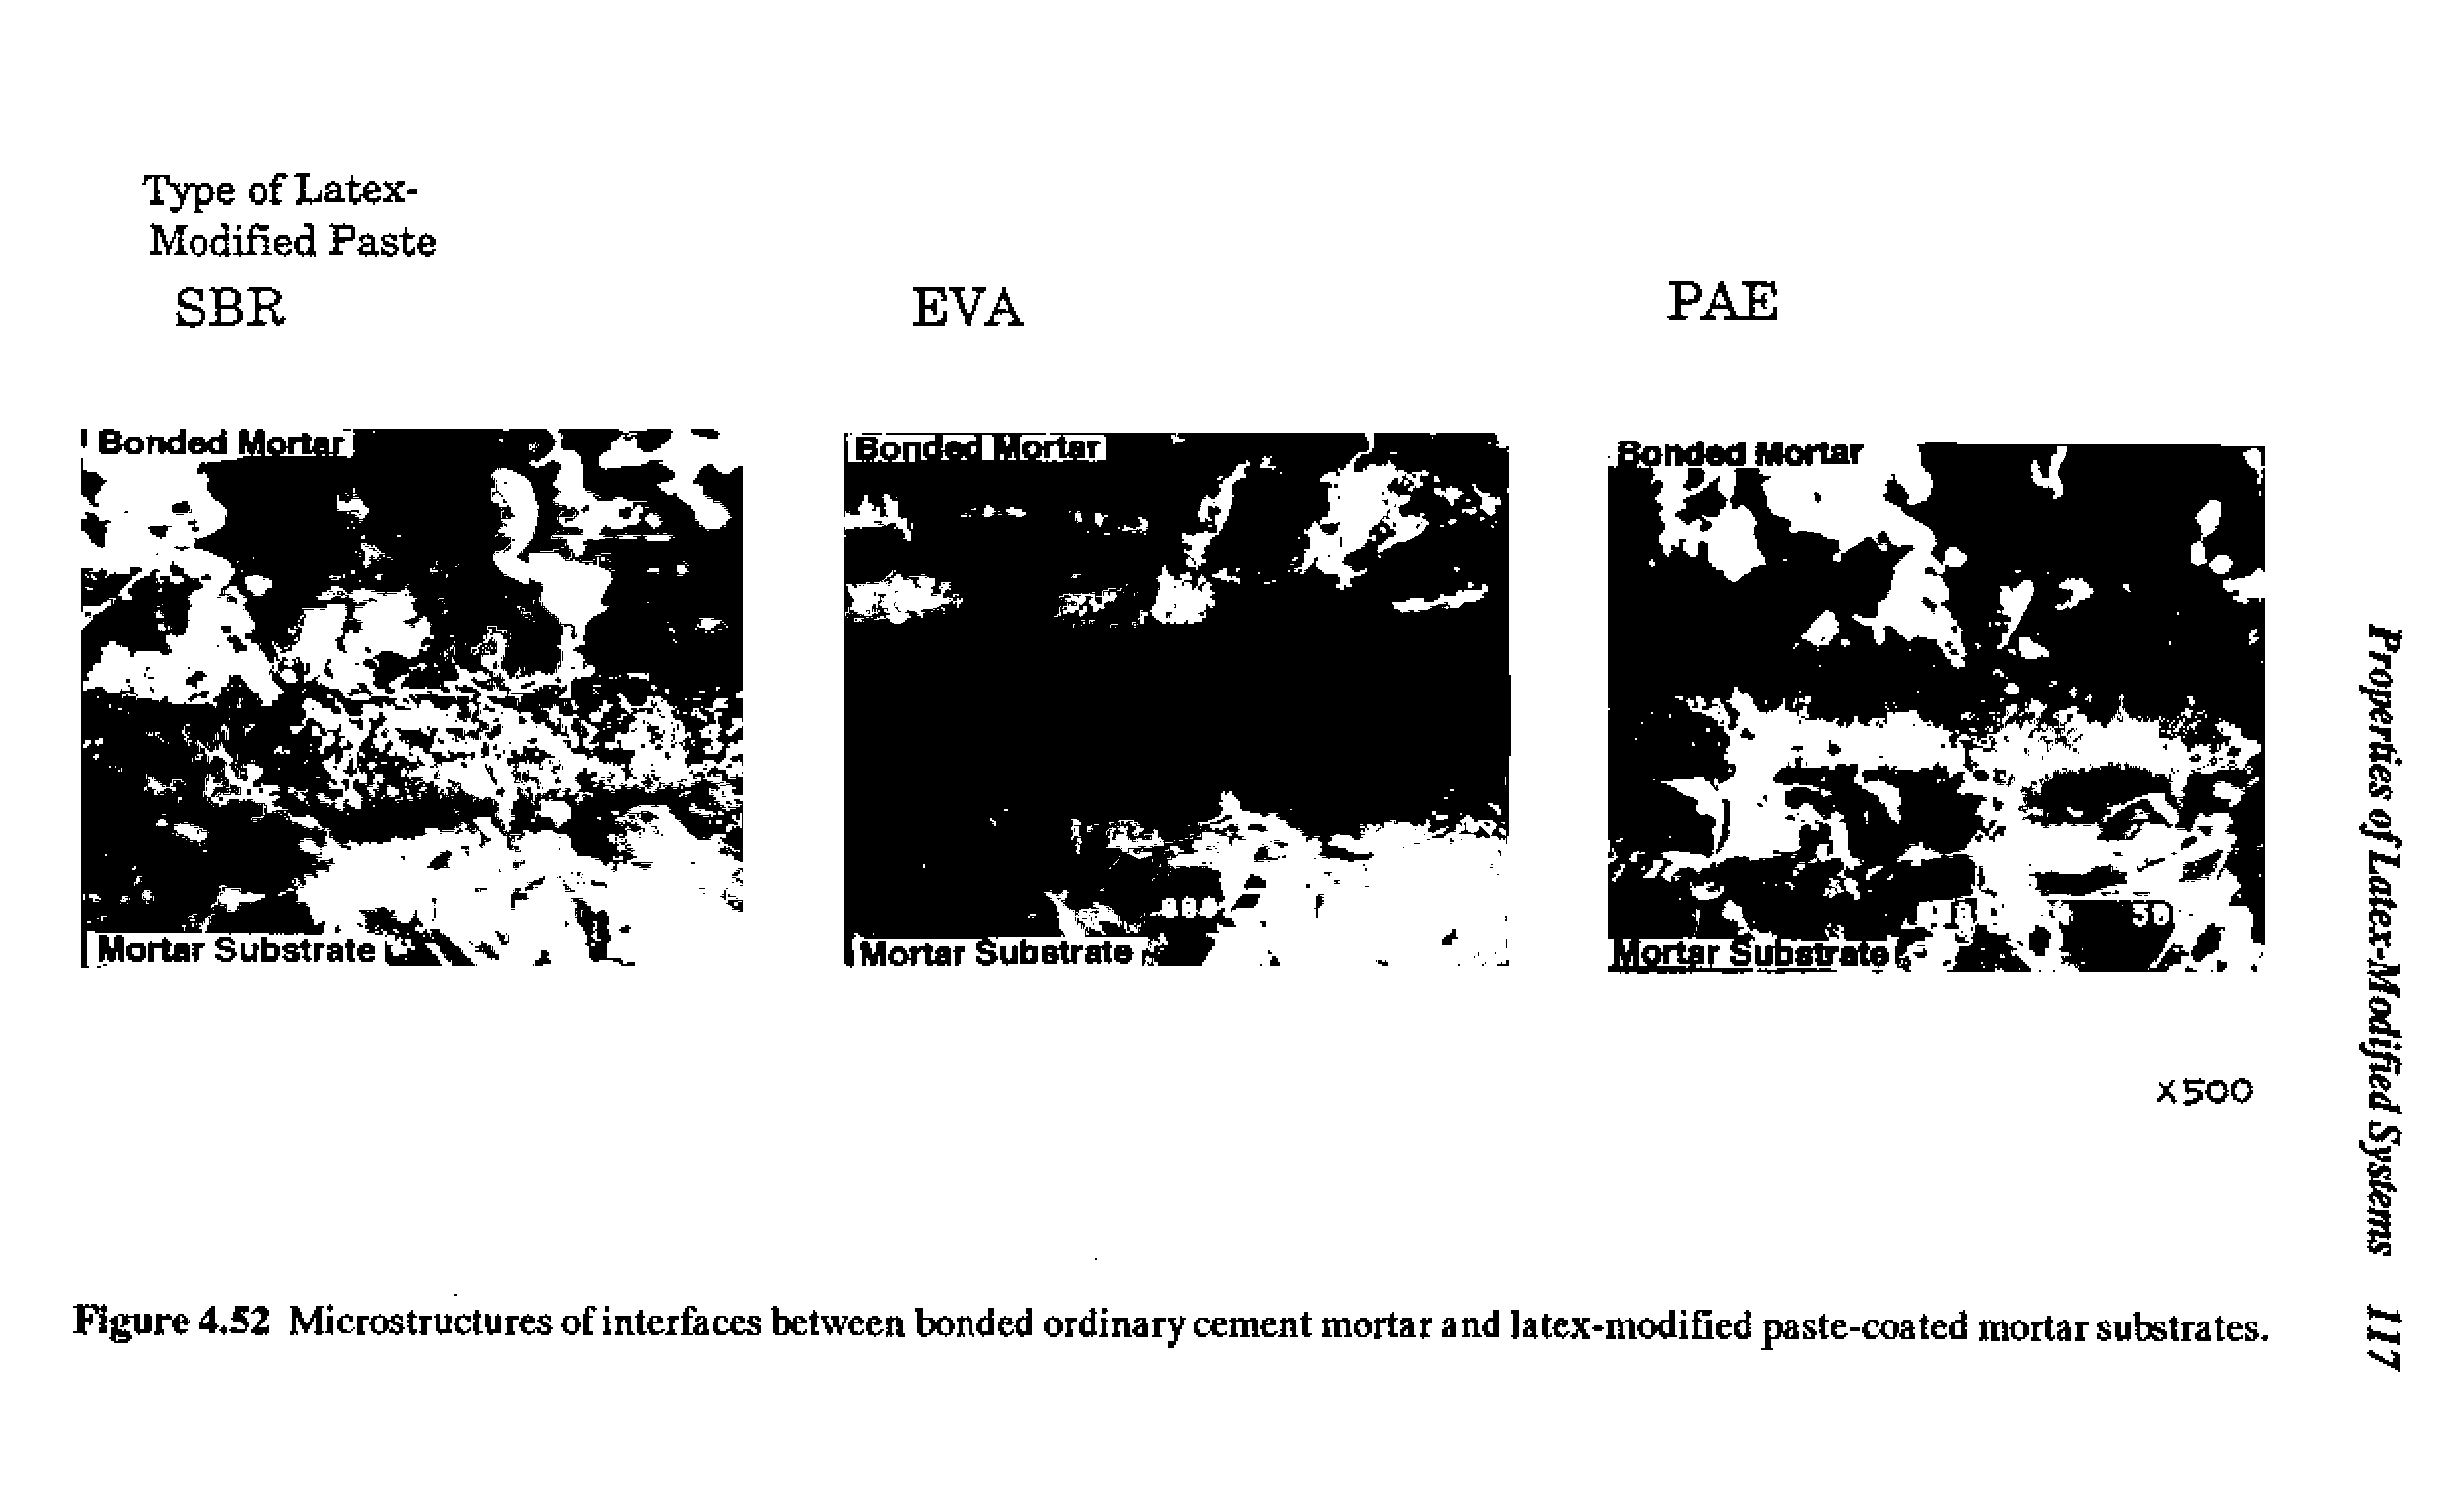 Figure 4,52 Microstructures ofinteifaces between bonded ordinarycement mortar and iatex-modiQed paste-coated mortar substrates.